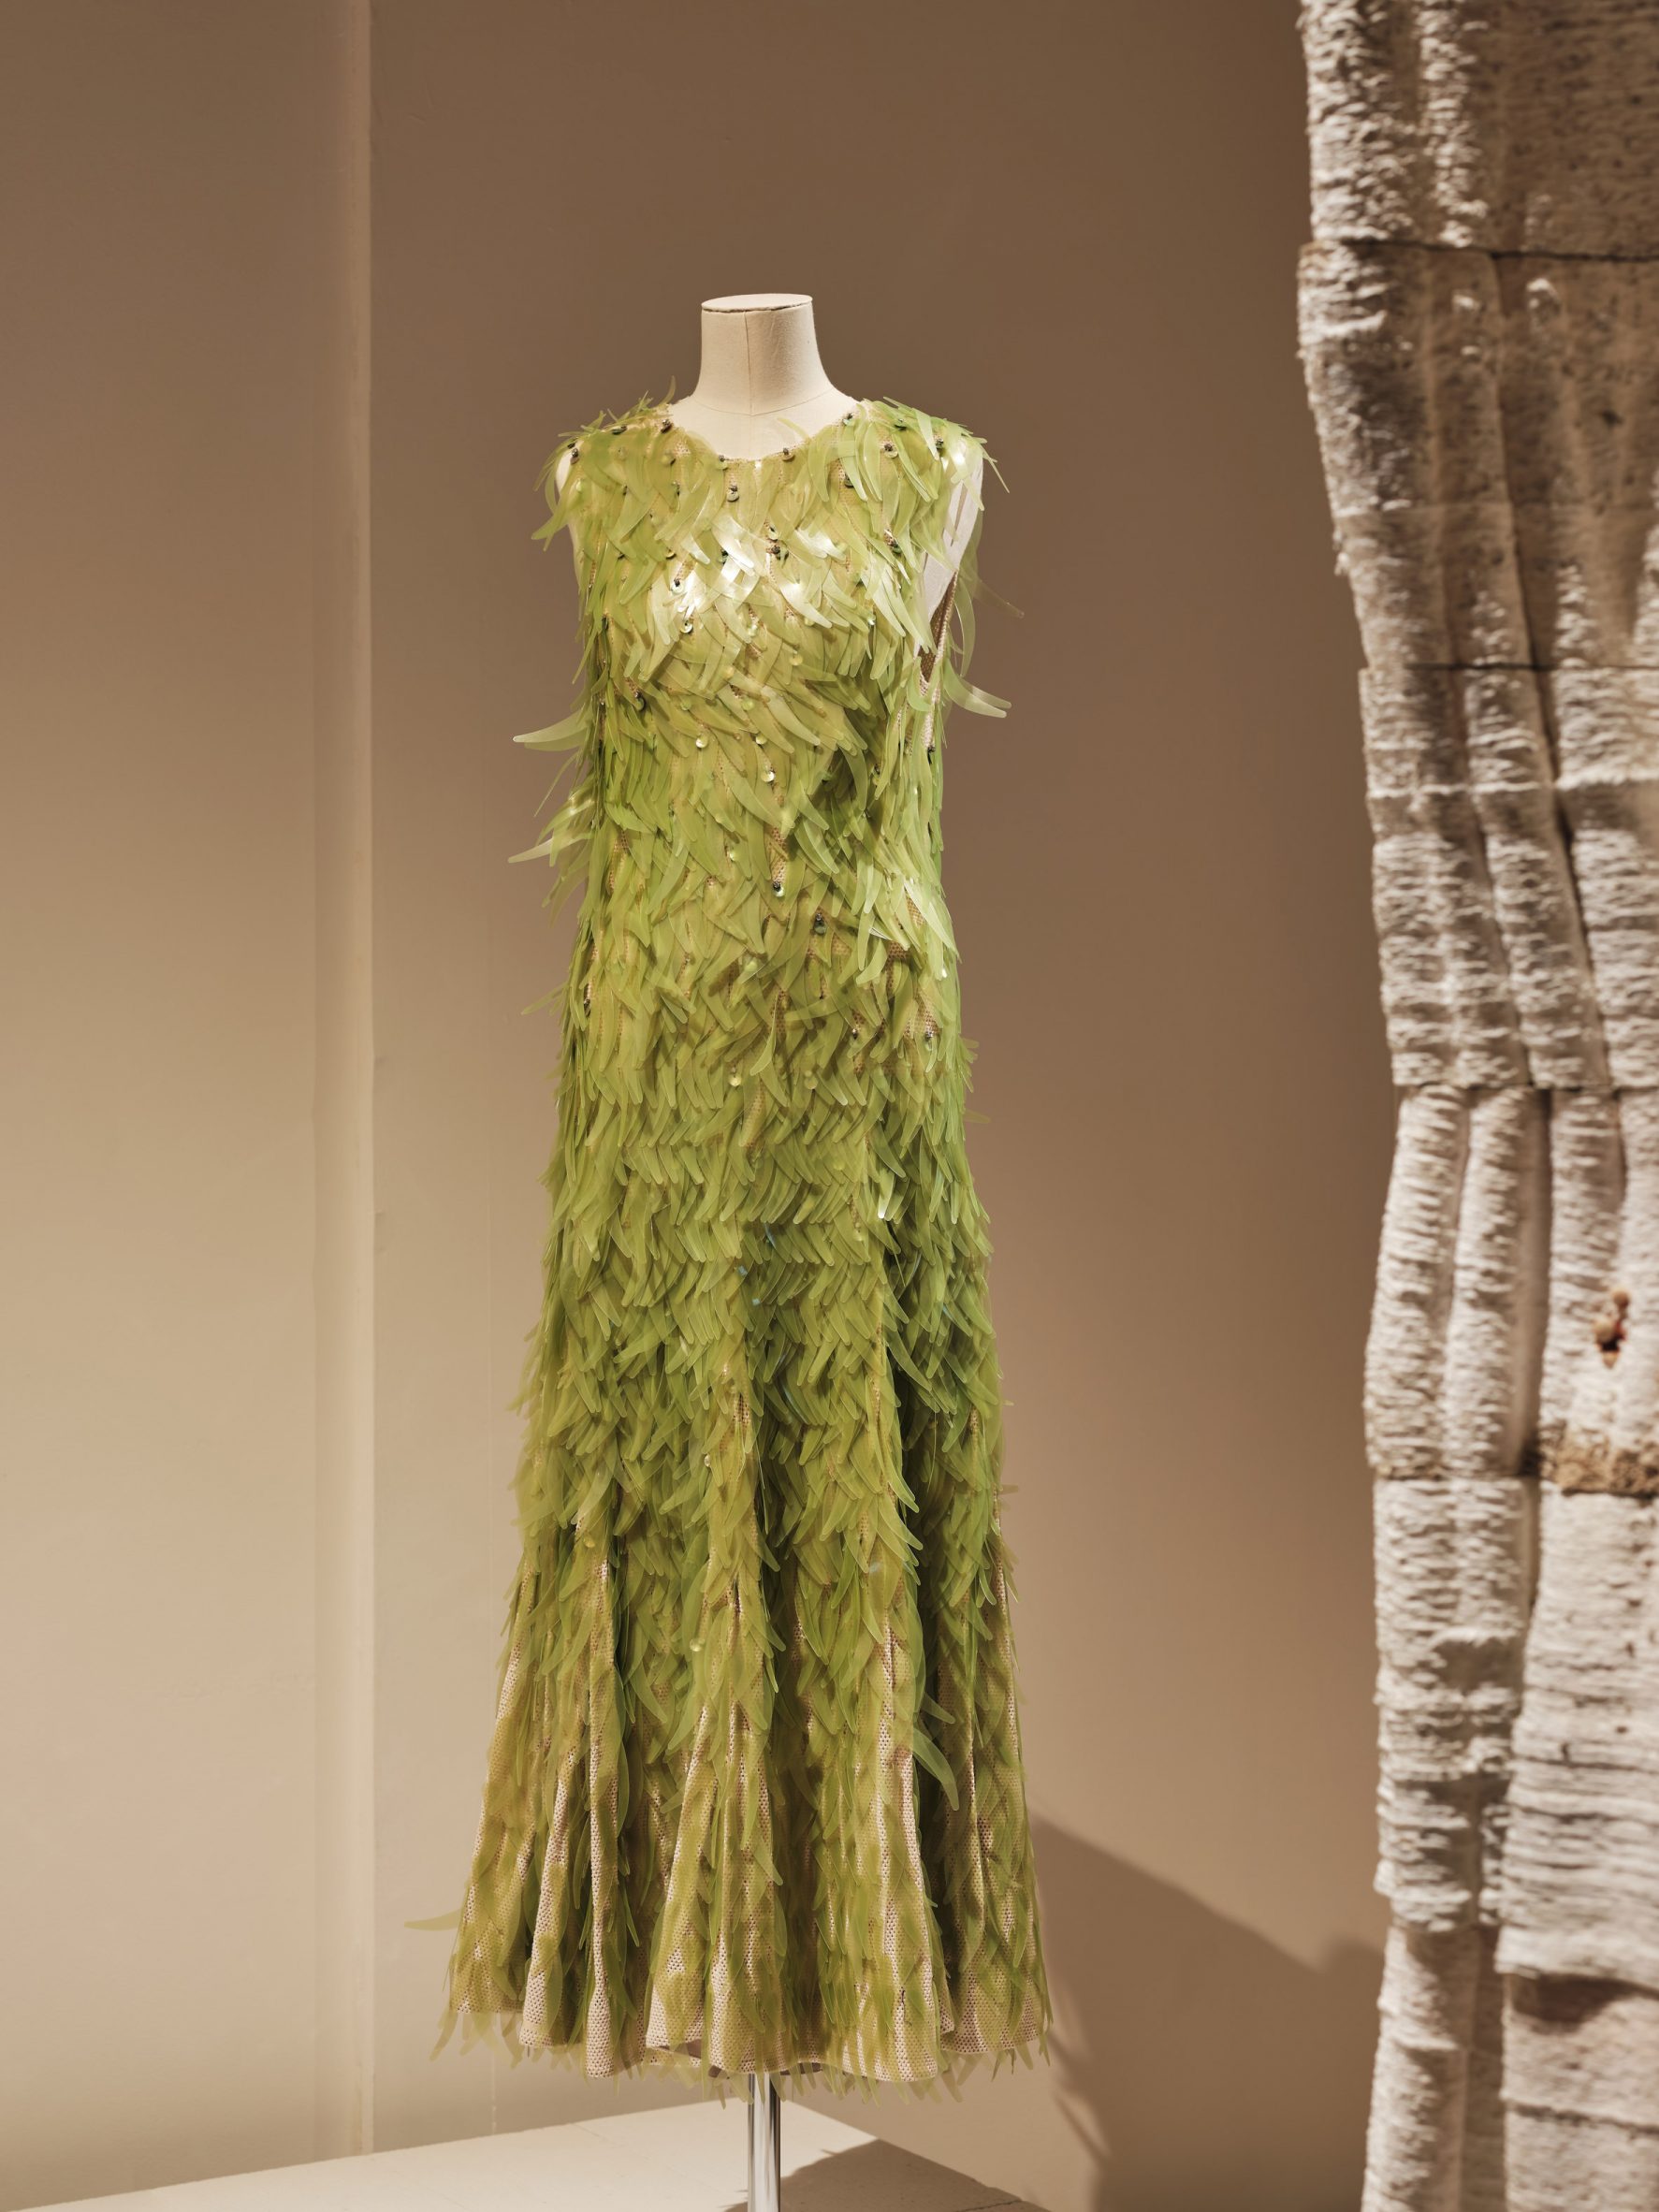 Charlotte McCurdy and Phillip lim dress at Design Museum